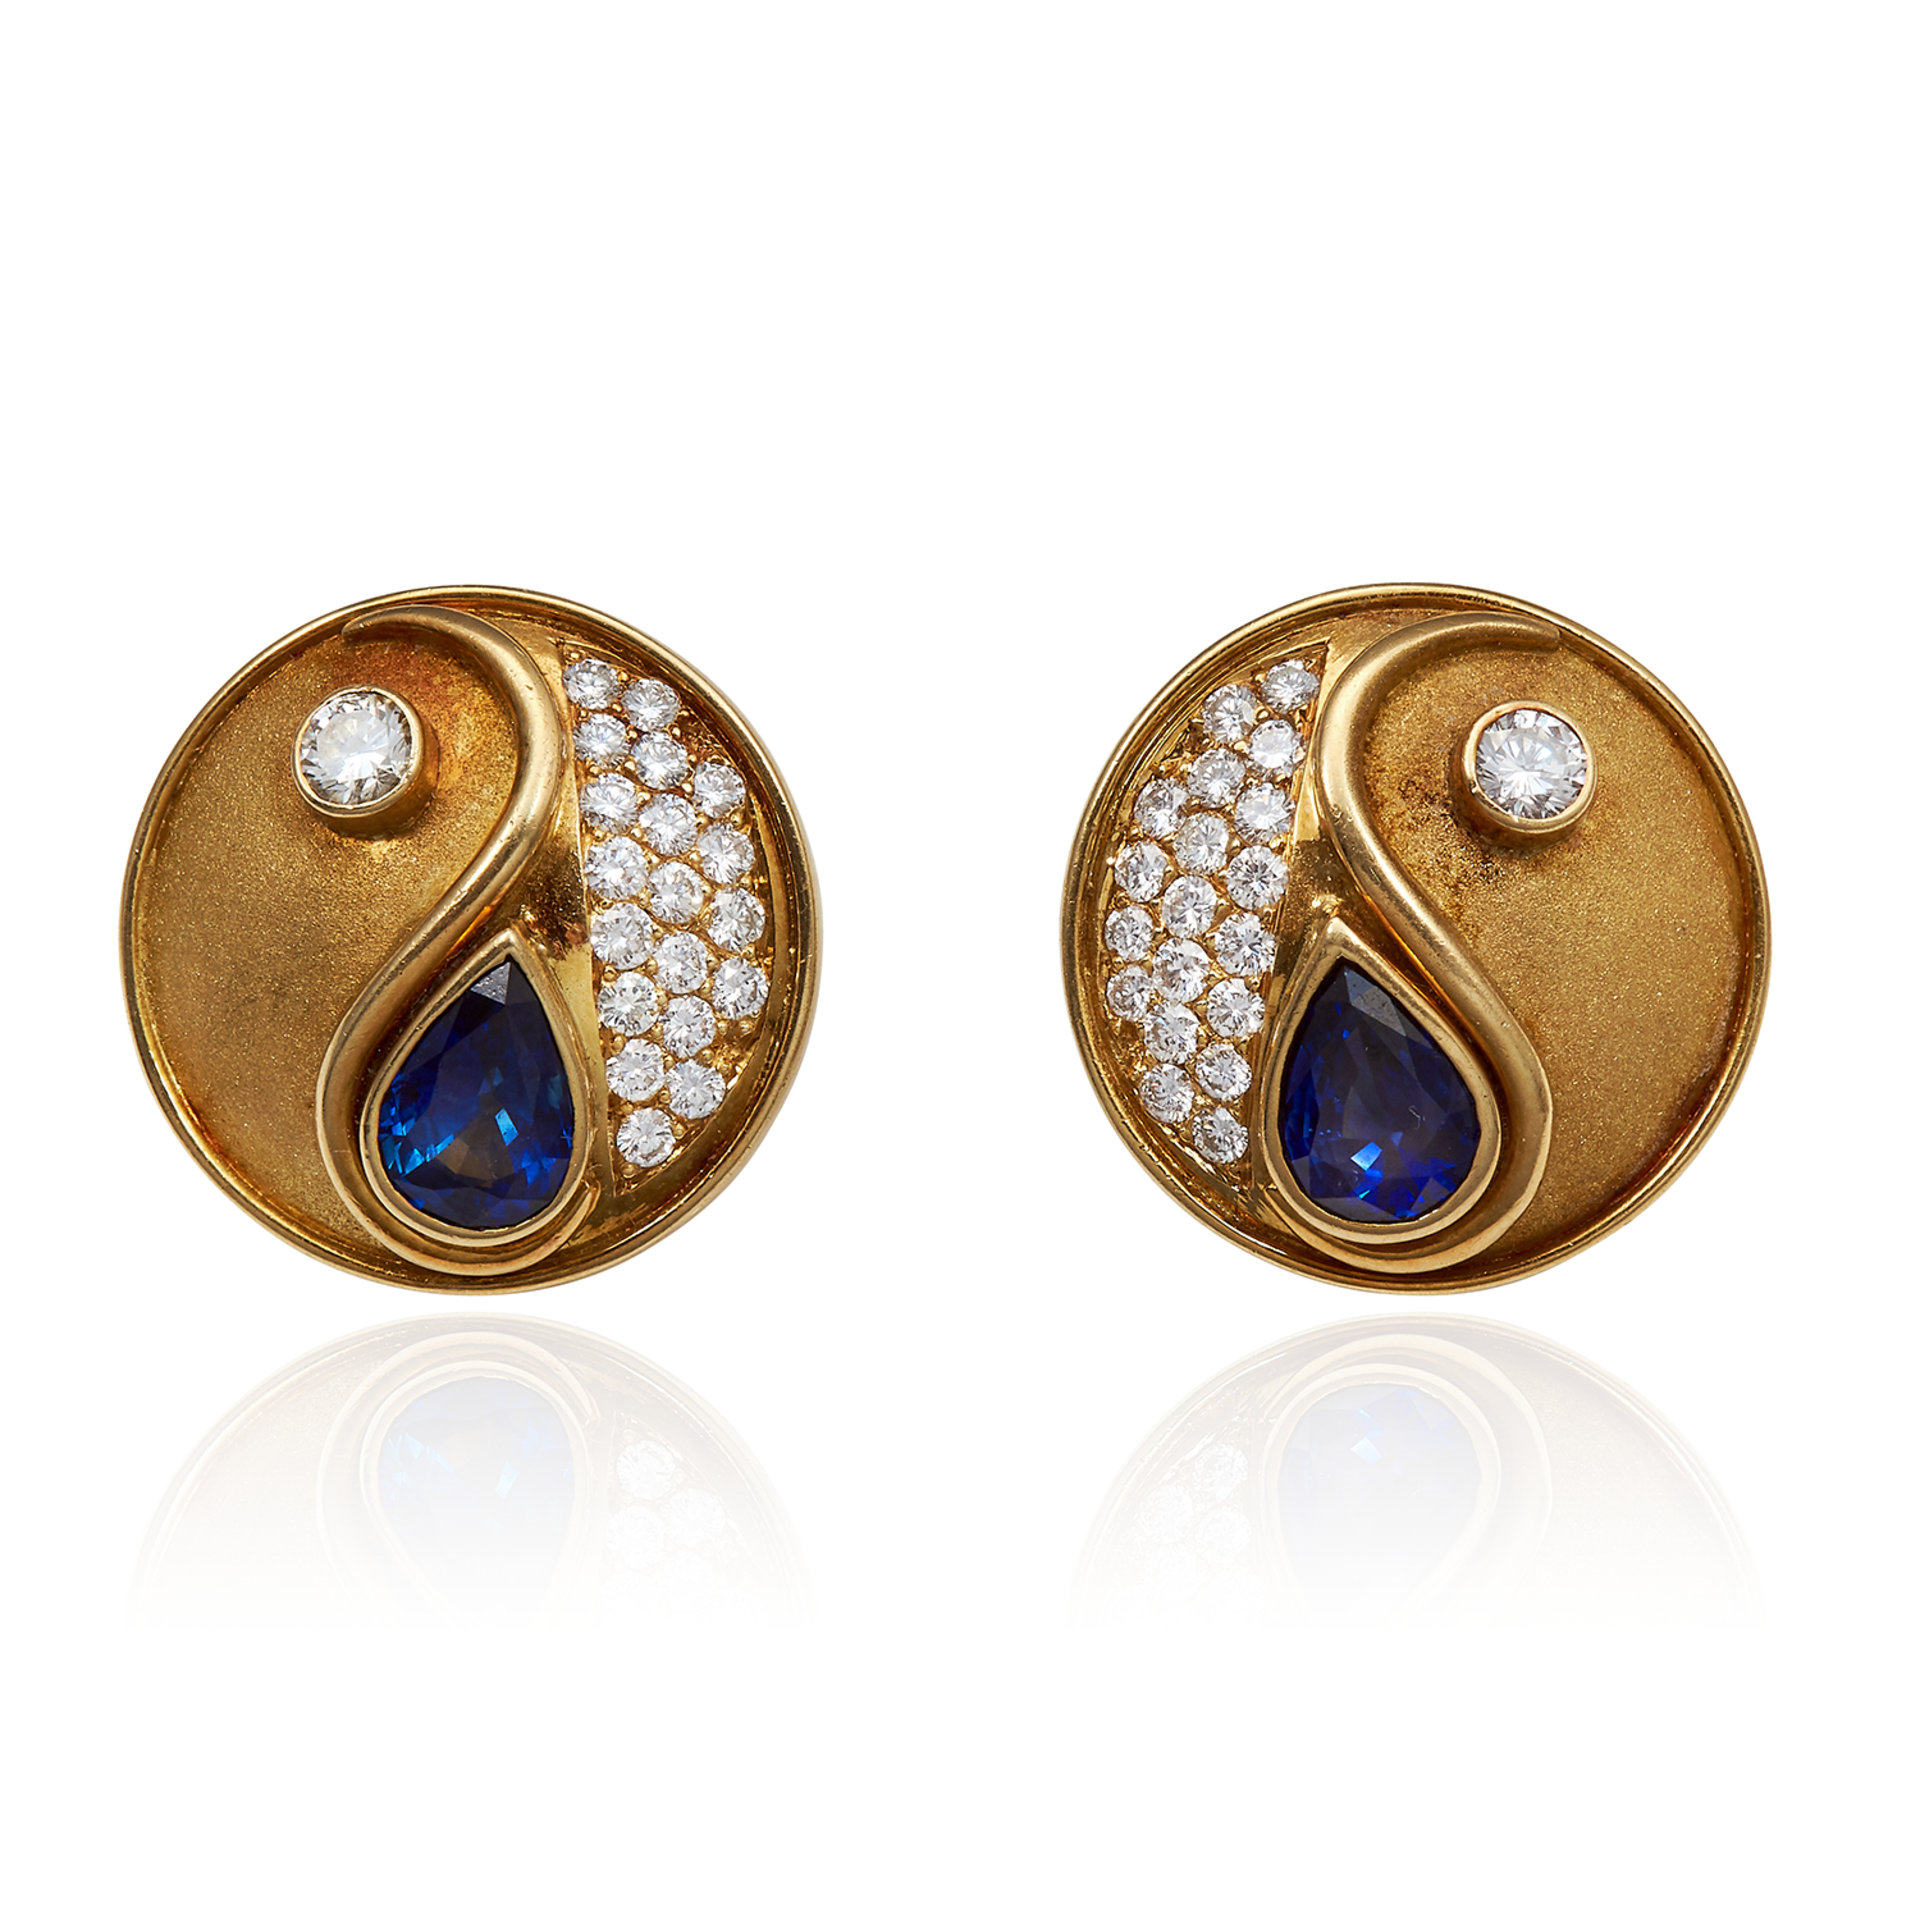 A PAIR OF DIAMOND AND SAPPHIRE YIN YANG EARRINGS, BOODLES in 18ct yellow gold, set with two pear cut